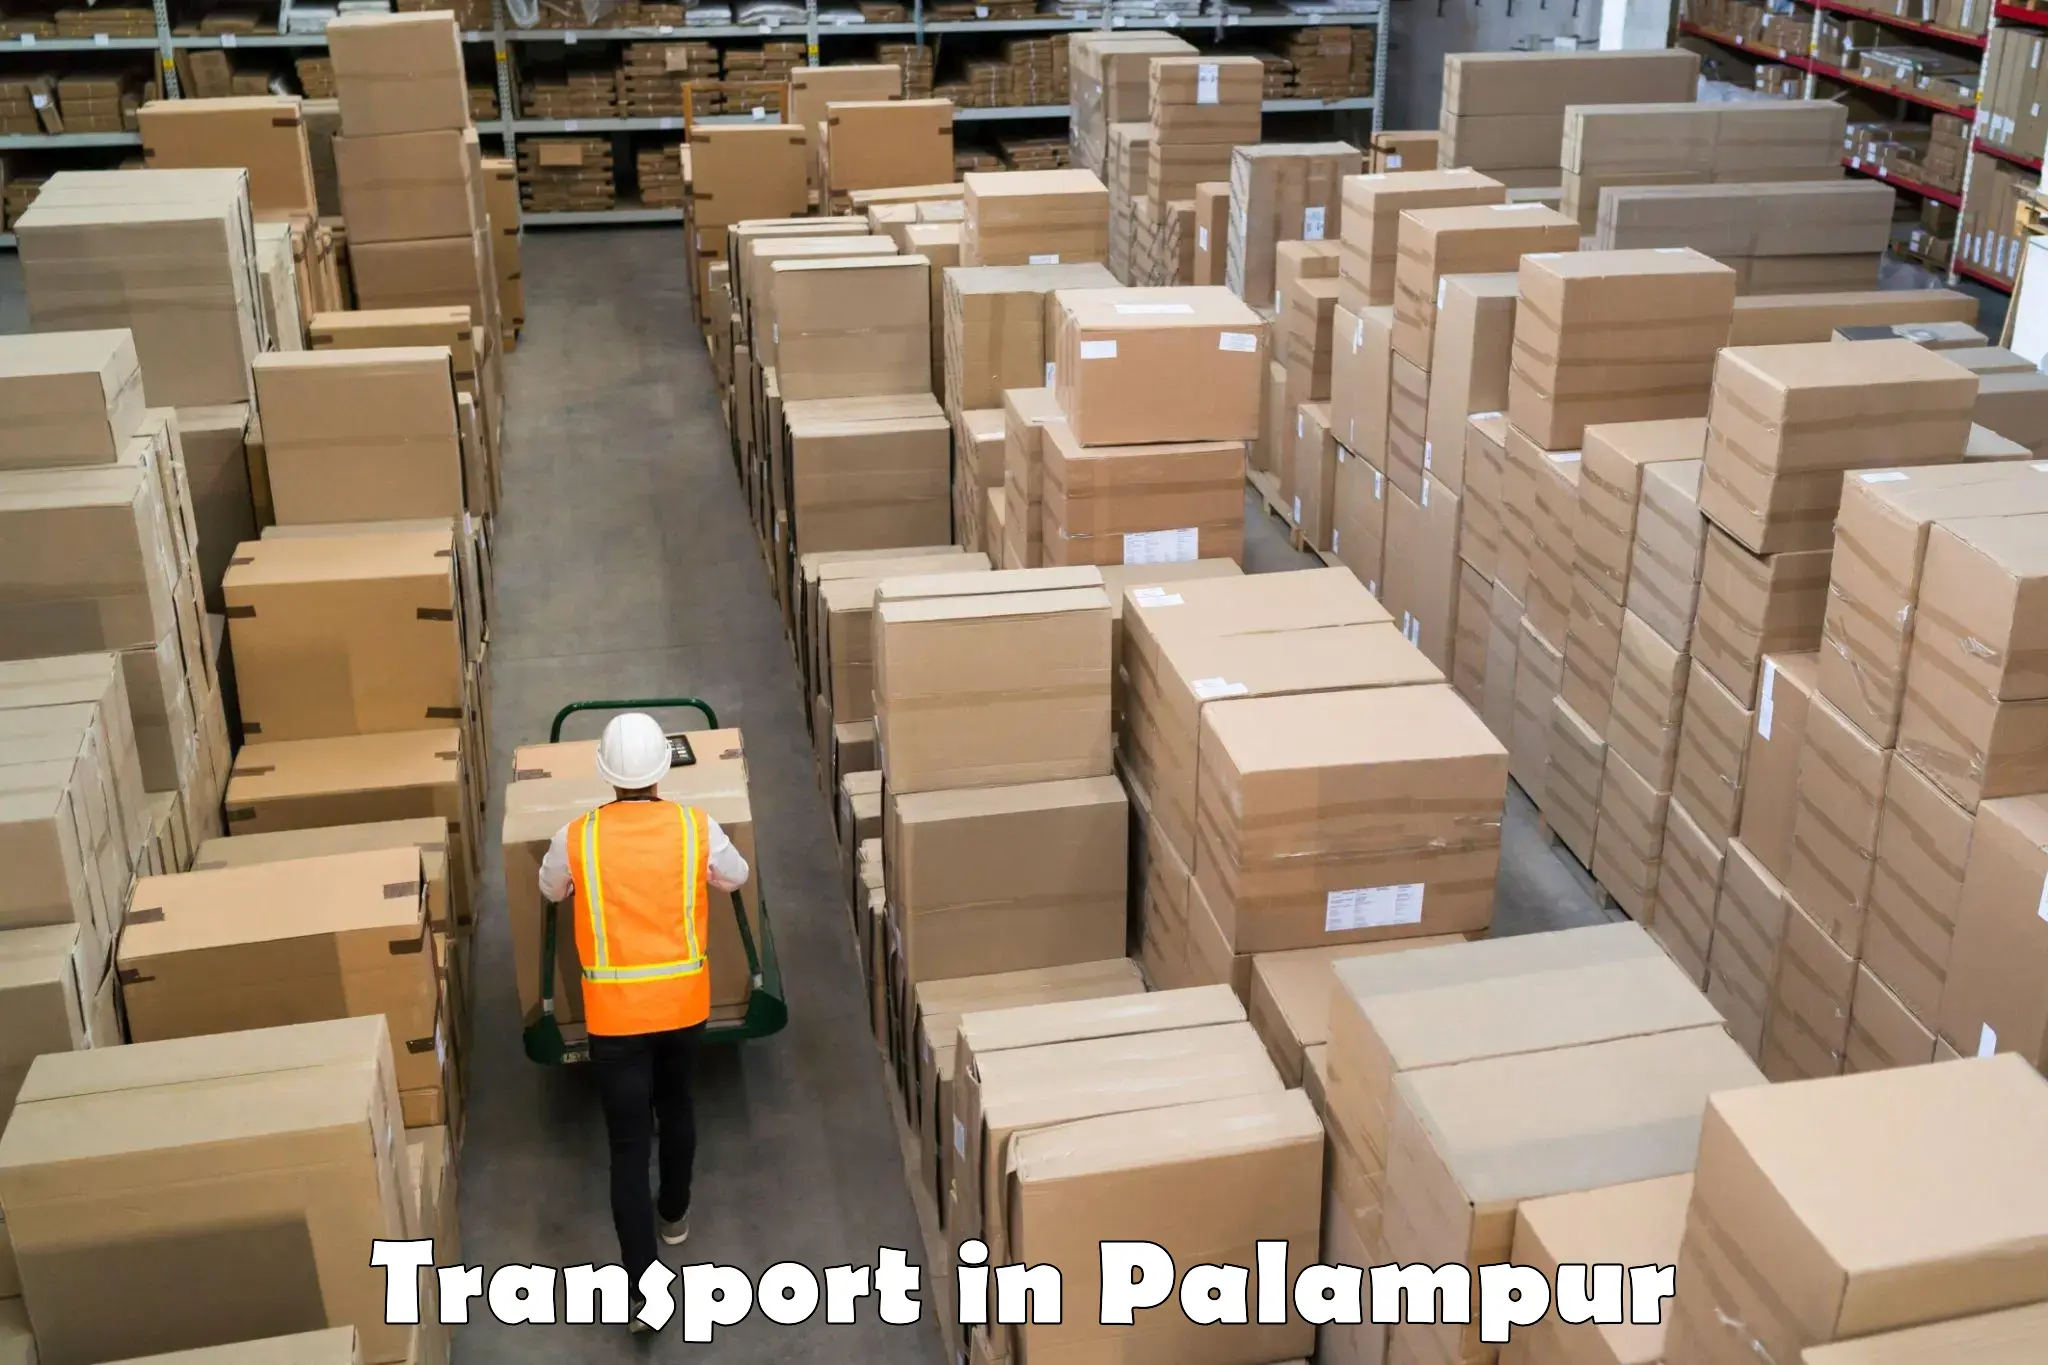 Interstate goods transport in Palampur